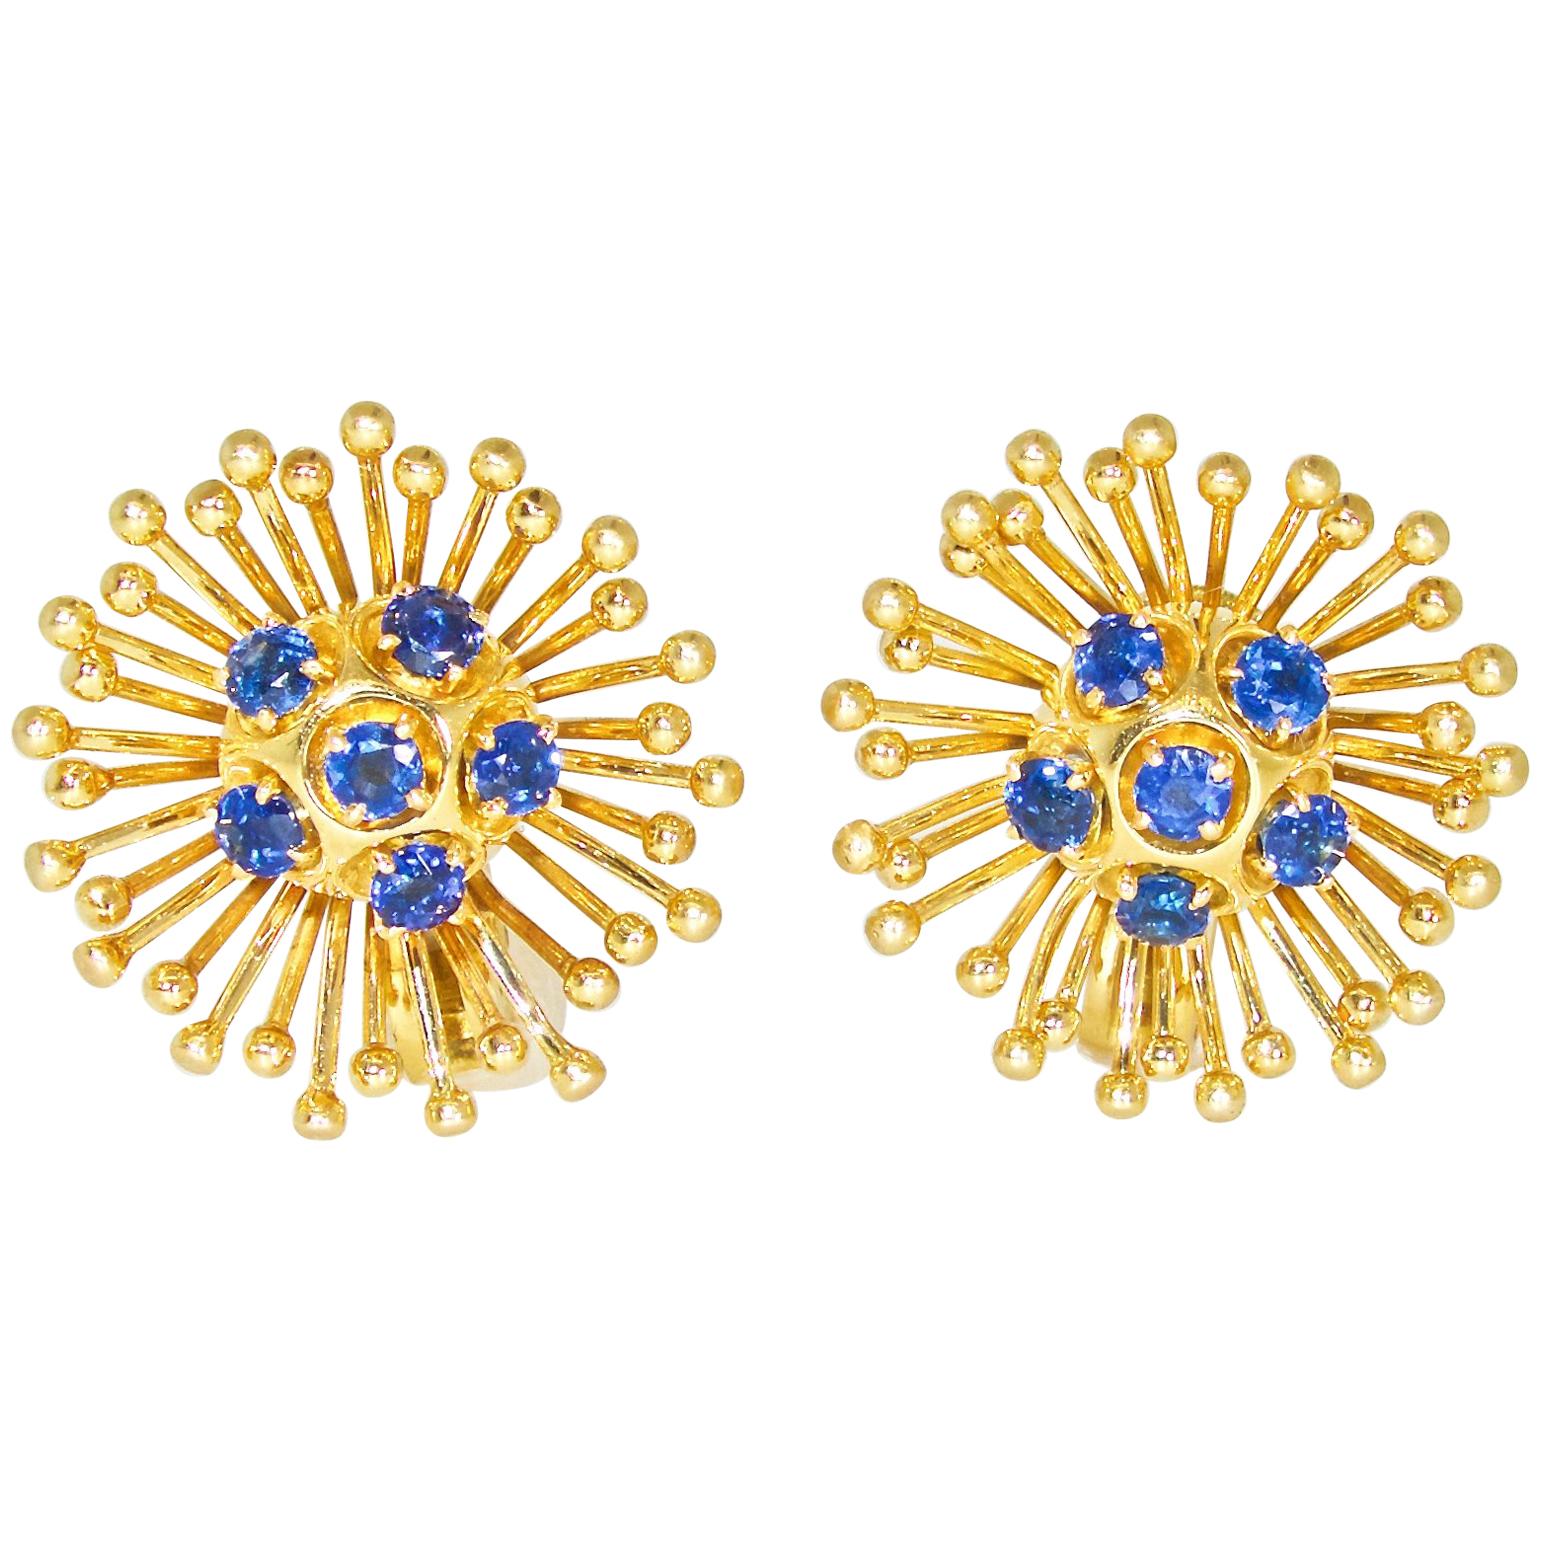 Cartier Retro Style Gold and Sapphire Earrings, circa 1950